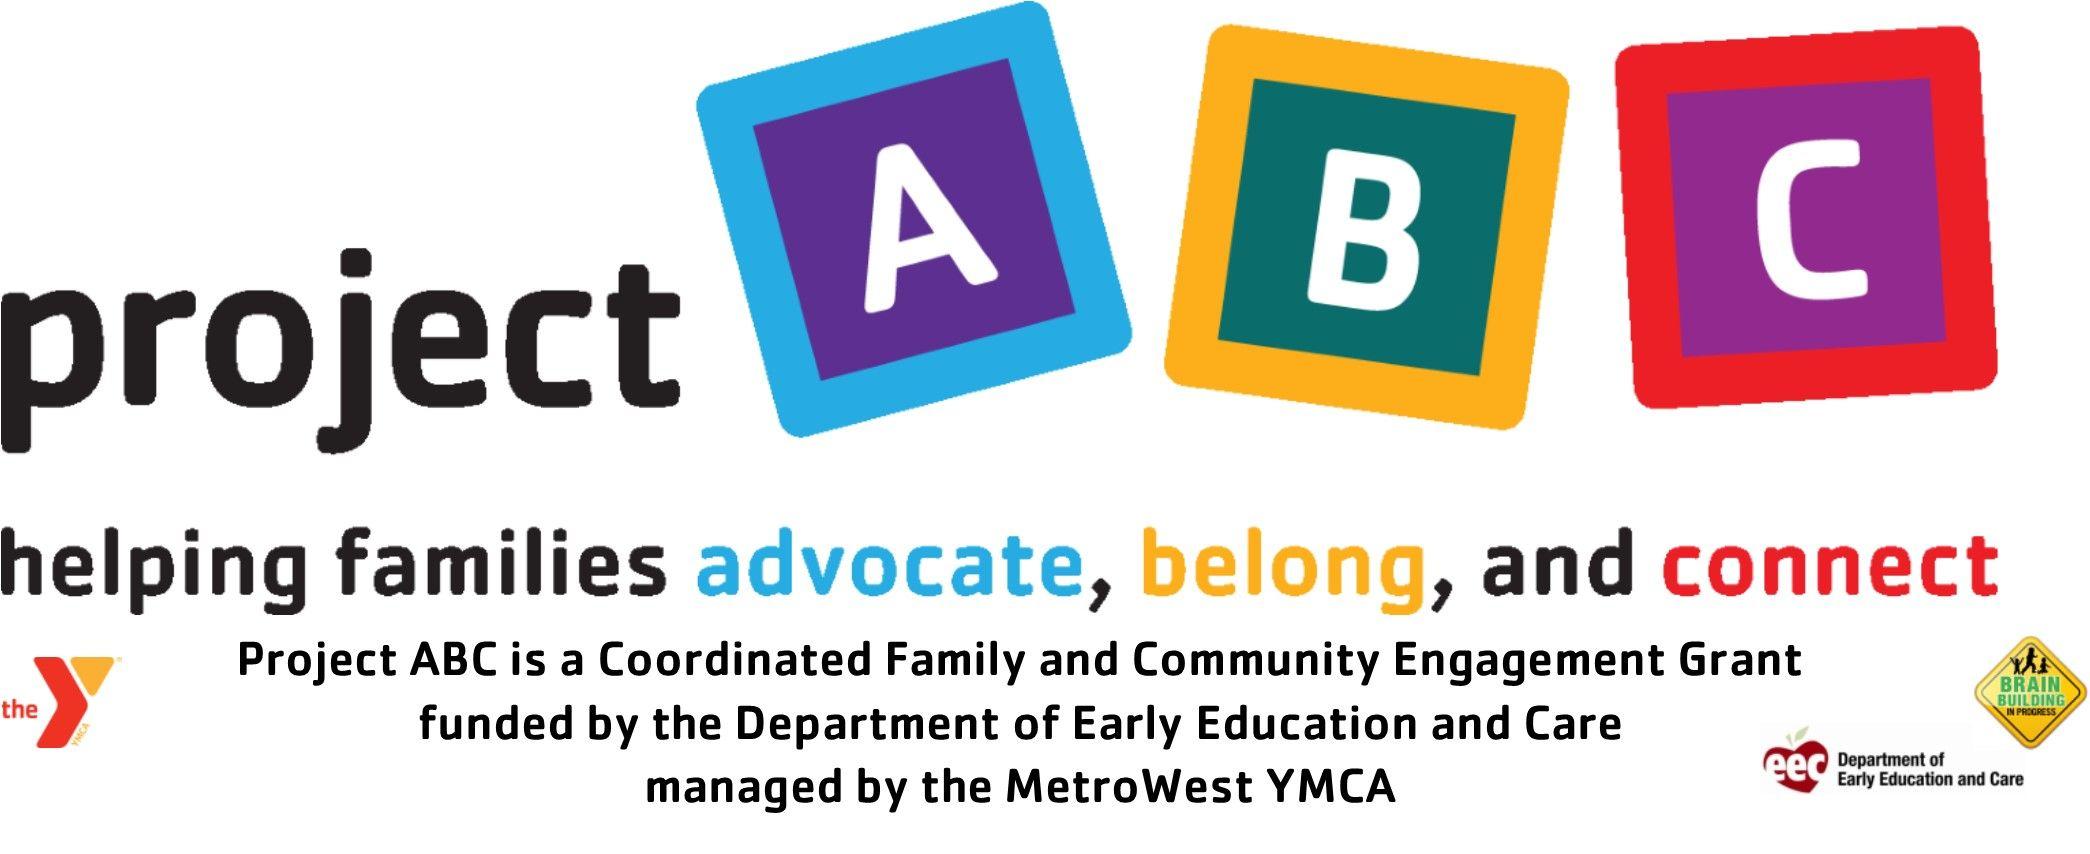 Family Y Logo - Project ABC | Metrowest YMCA | MetroWest YMCA